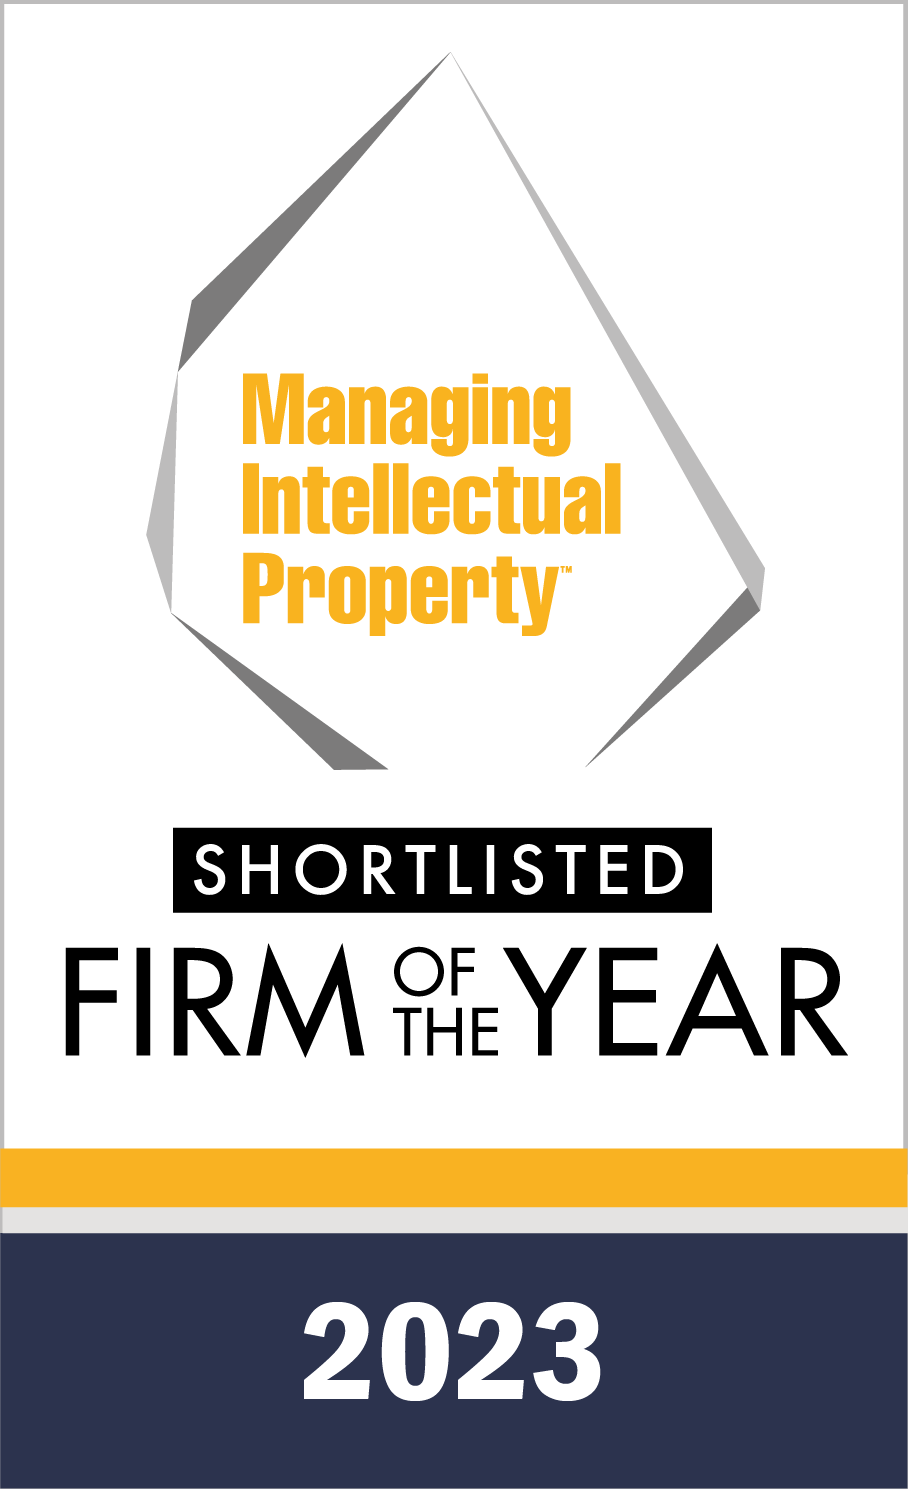 Best firm Italy intellectual property